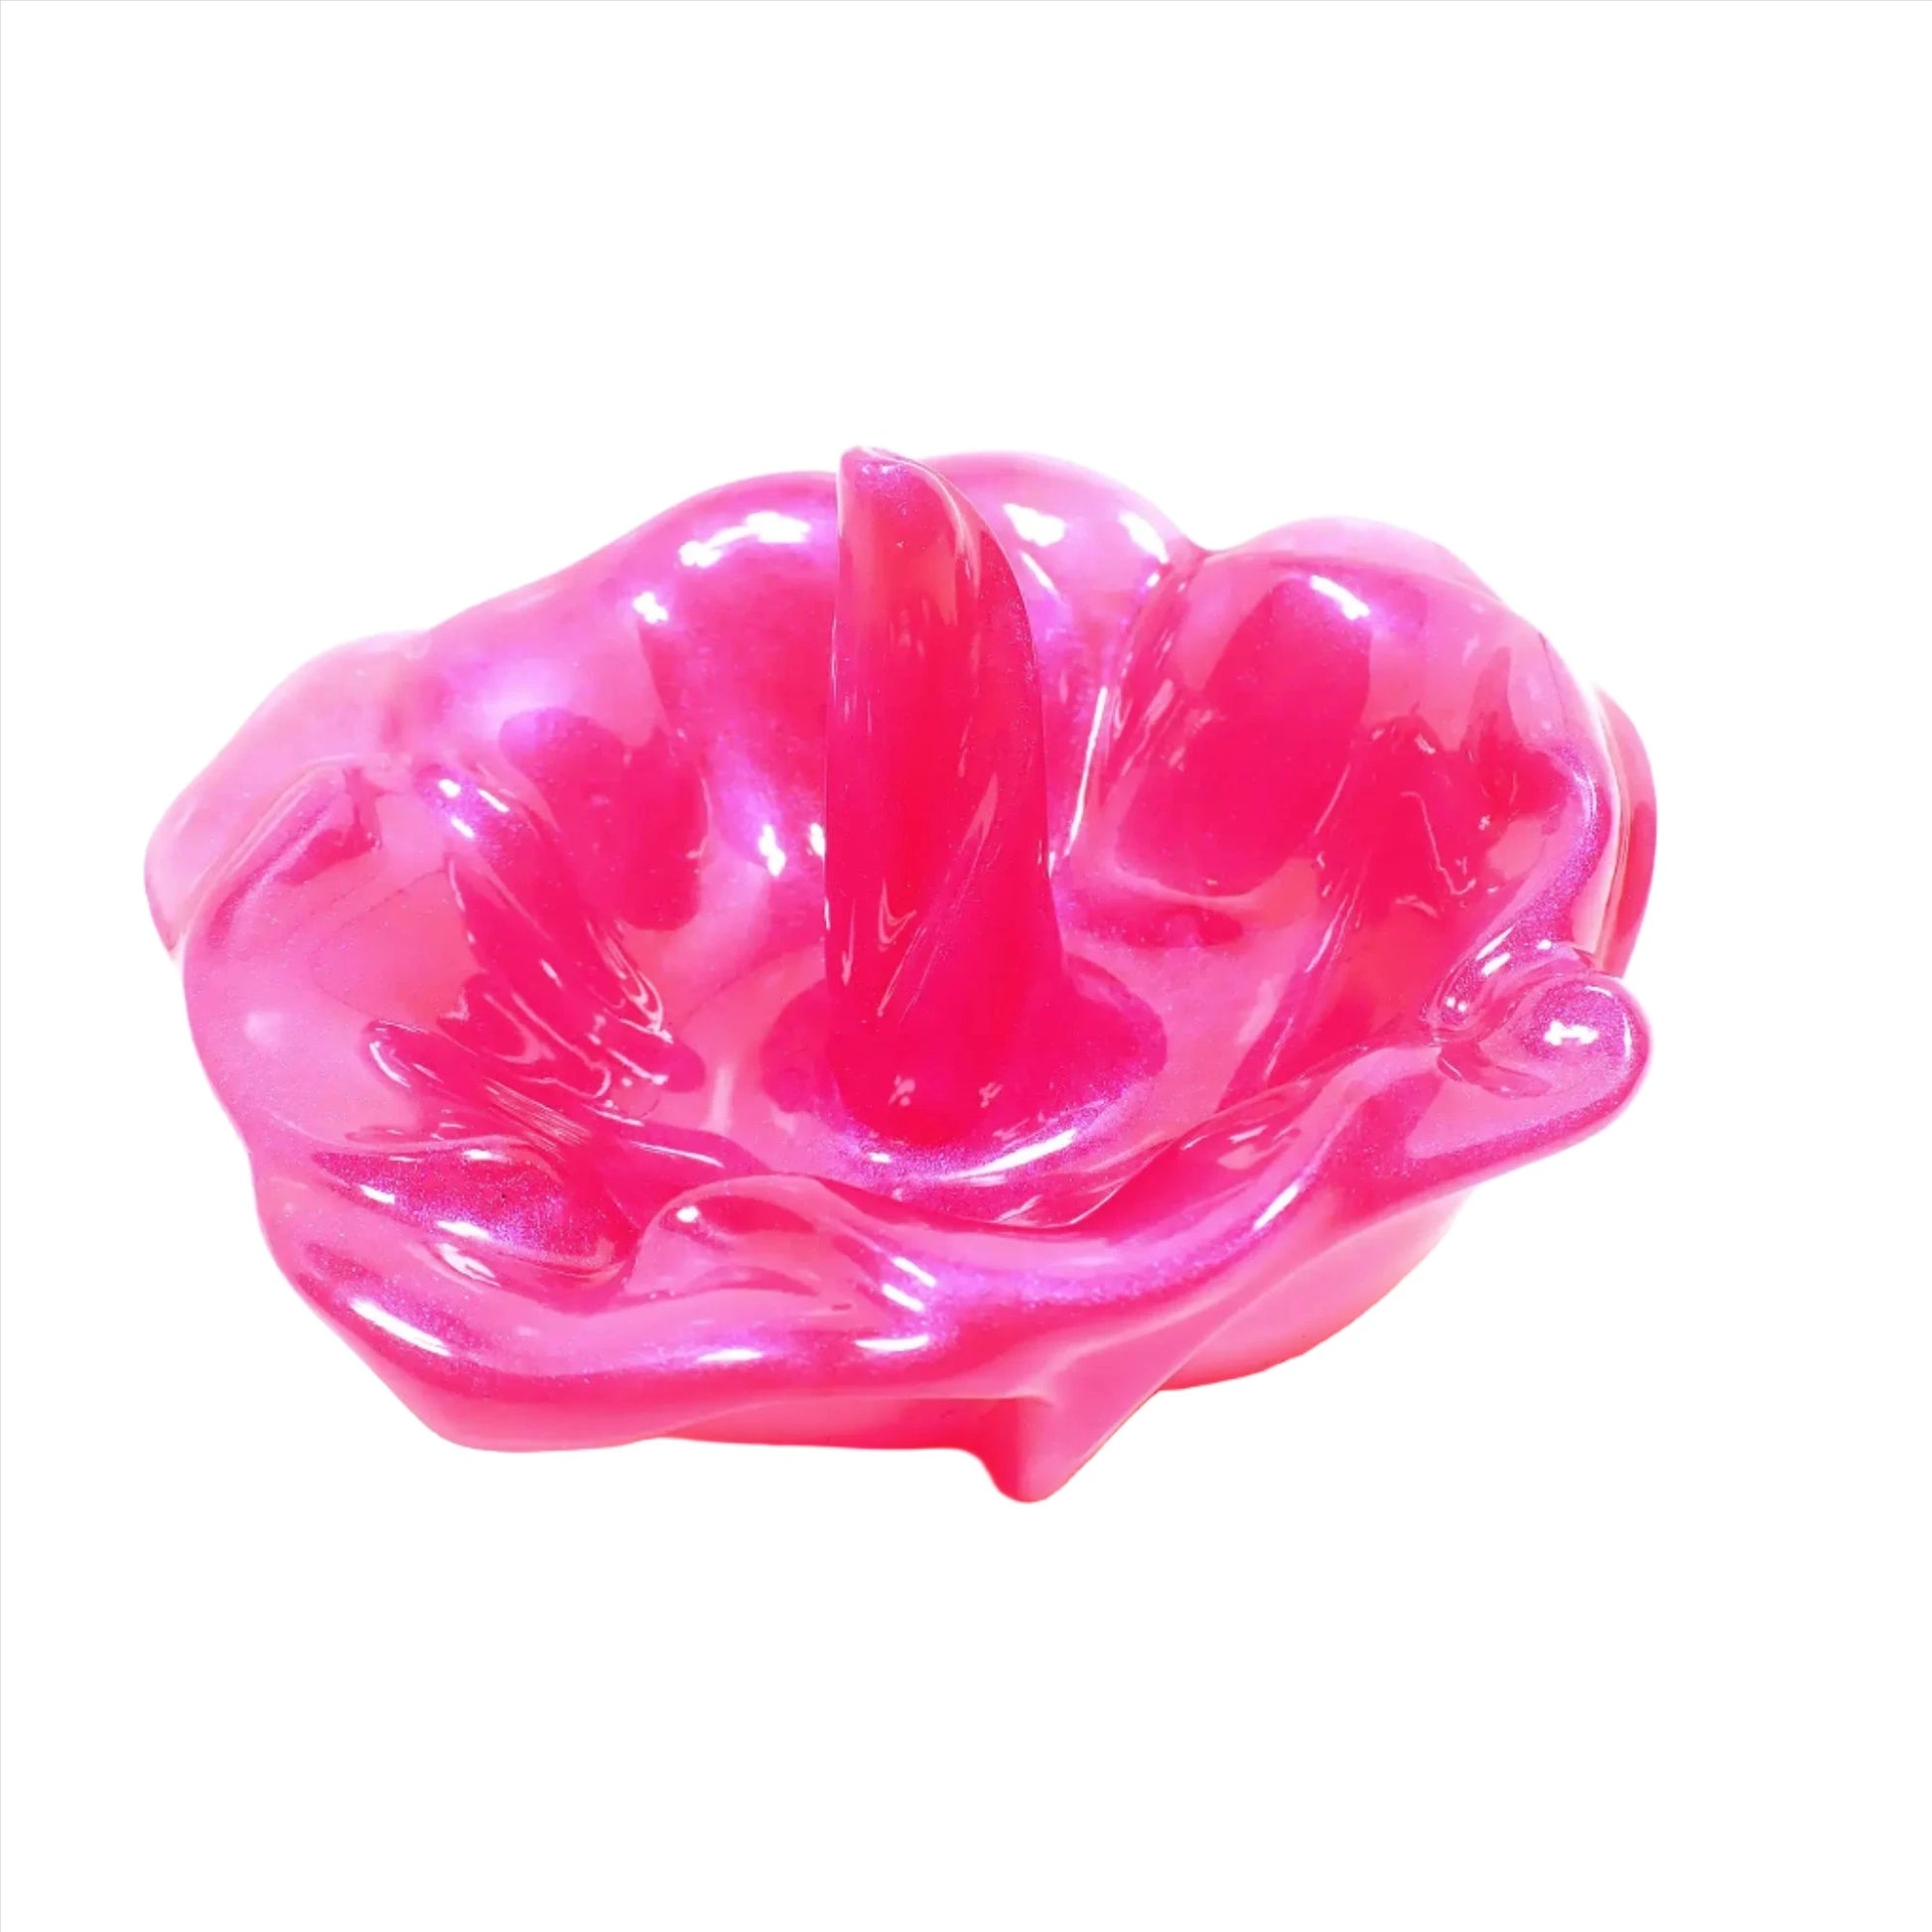 Angled view of the handmade resin ring dish holder. It is pearly bright hot pink in color with hints of purple sheen as the light hits it.